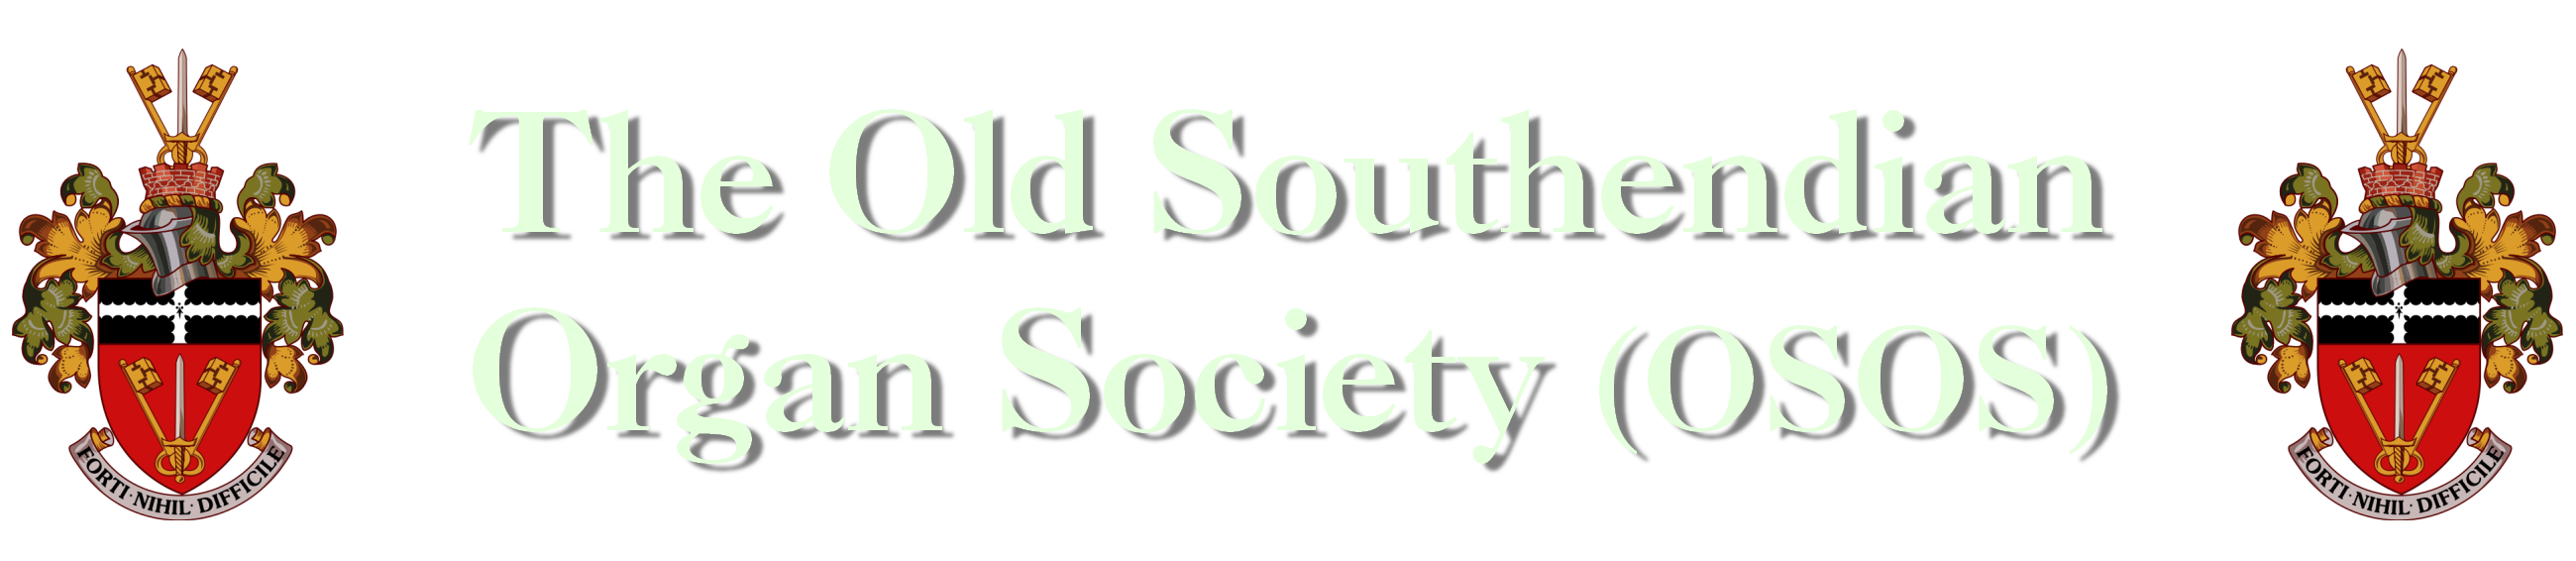 The Old Southendian Organ Society